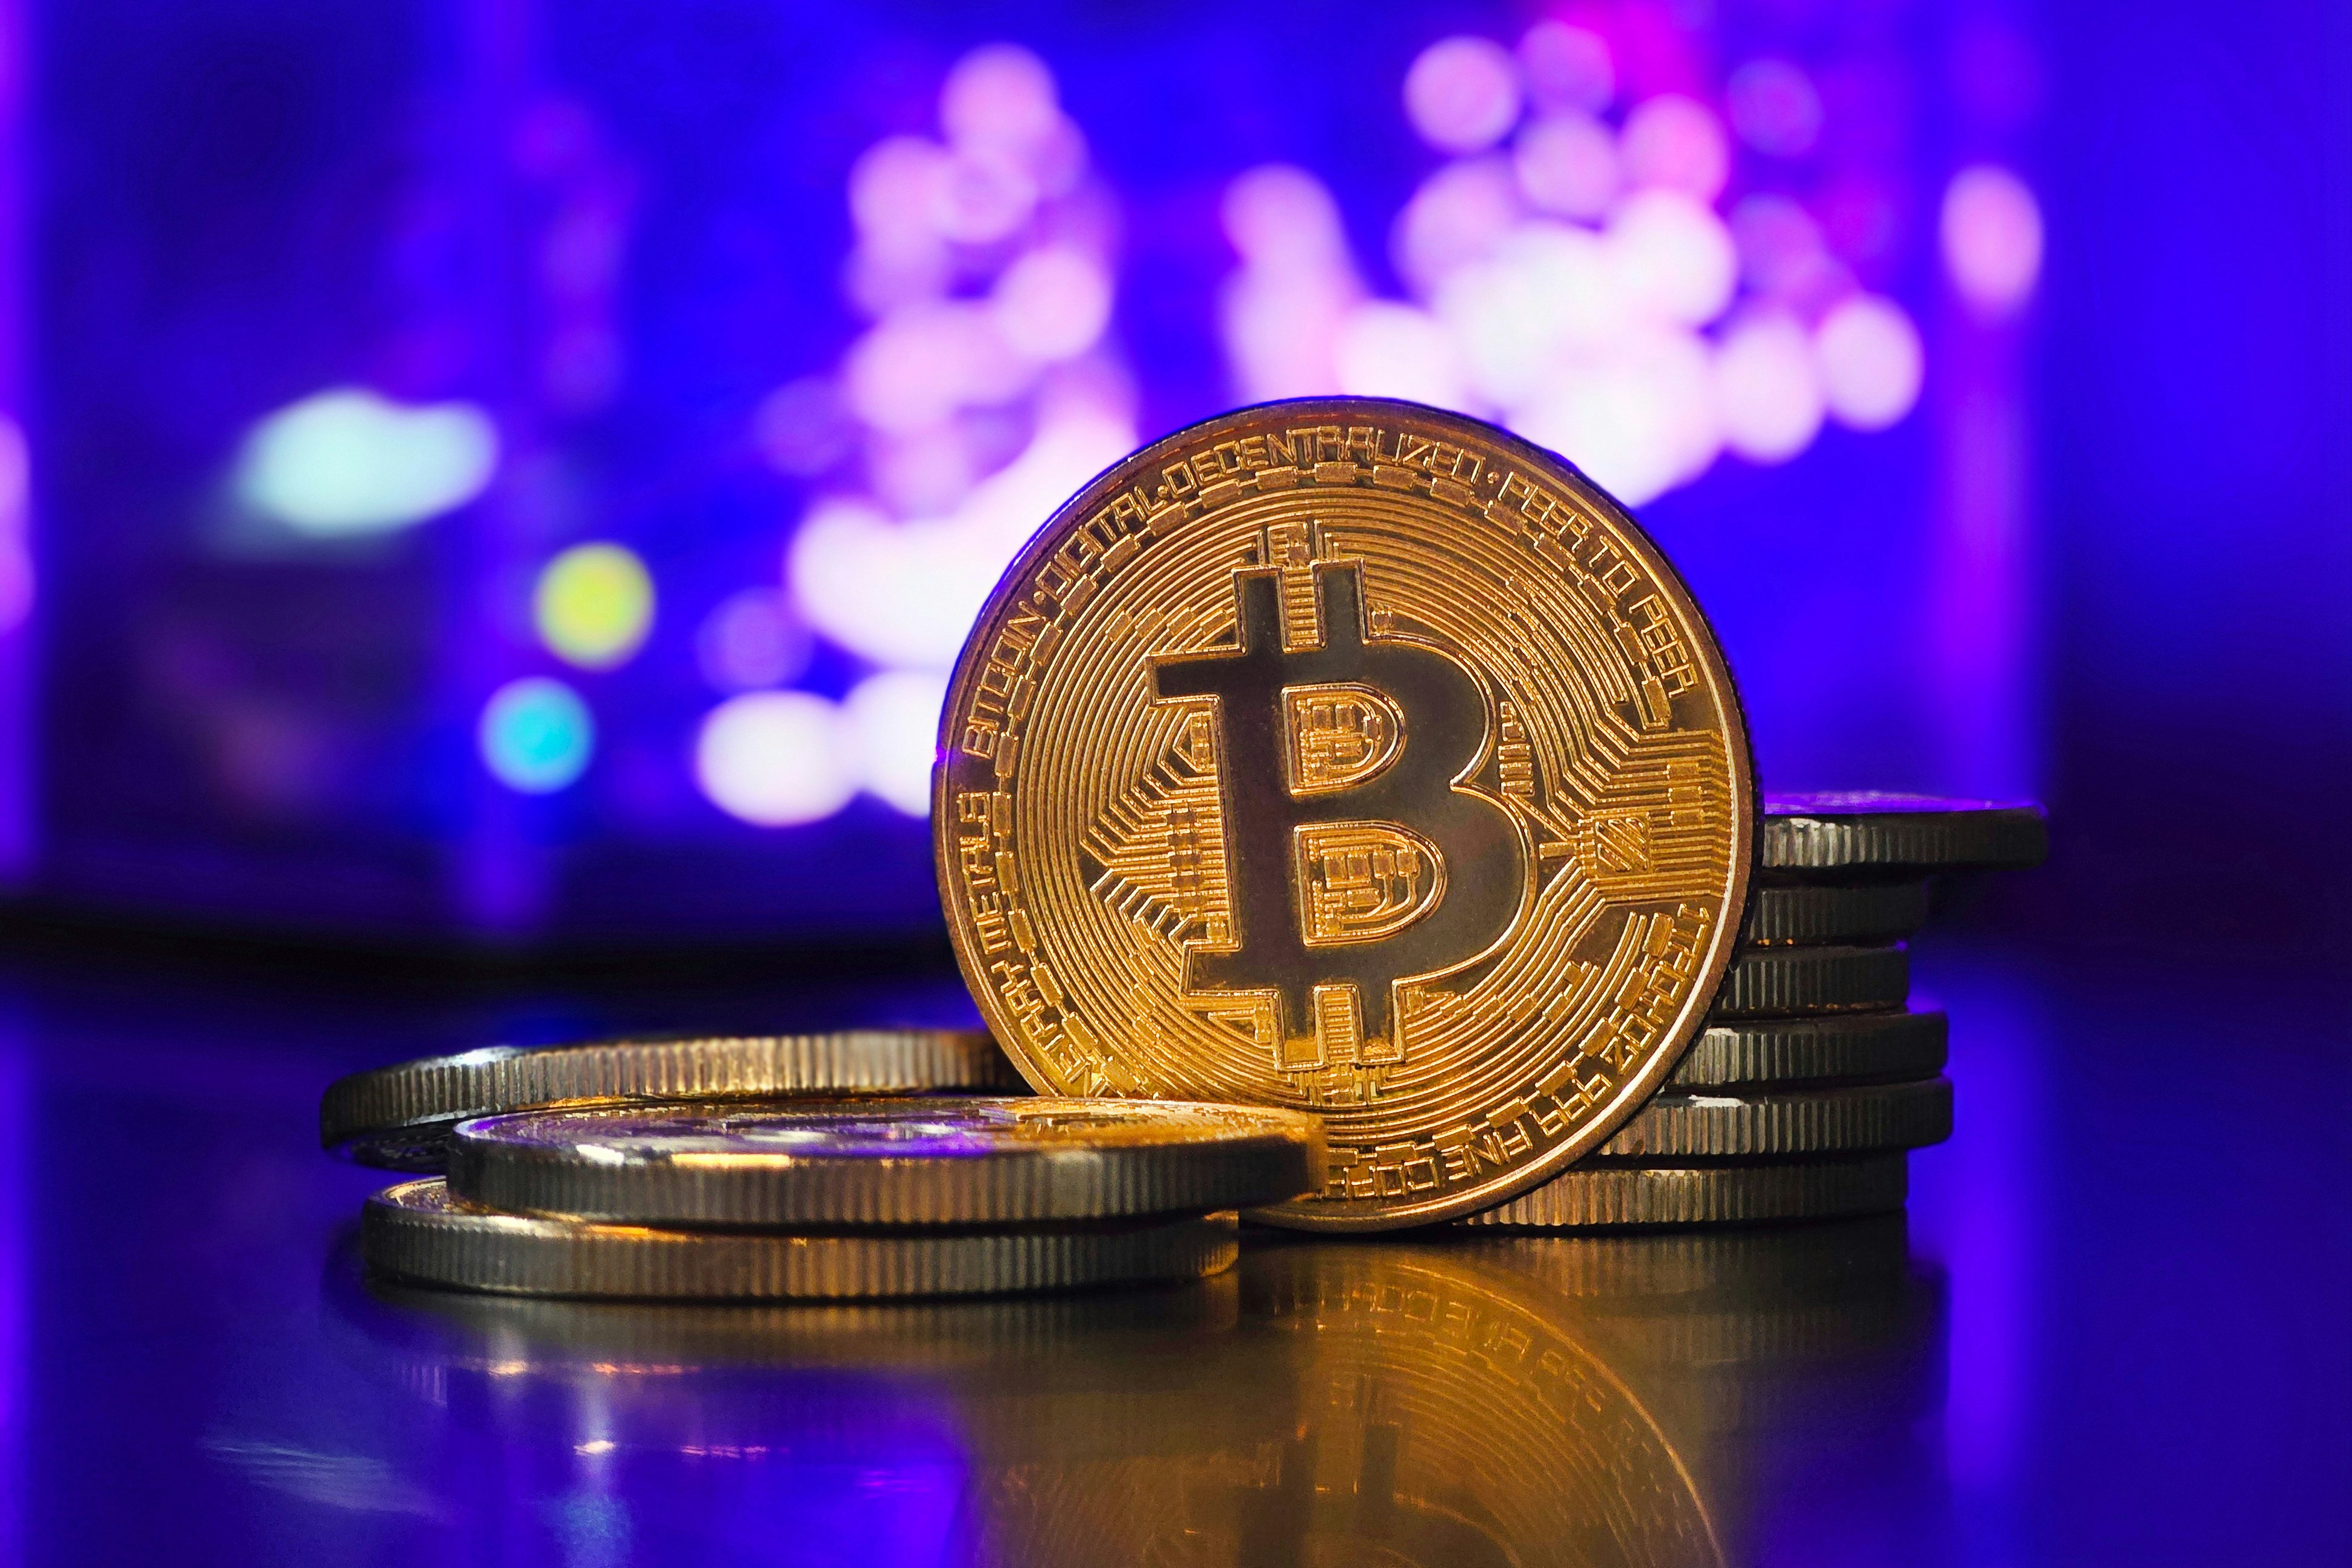 Bitcoin Institutional Selling Behind $57,000 Crash? Data Suggests So